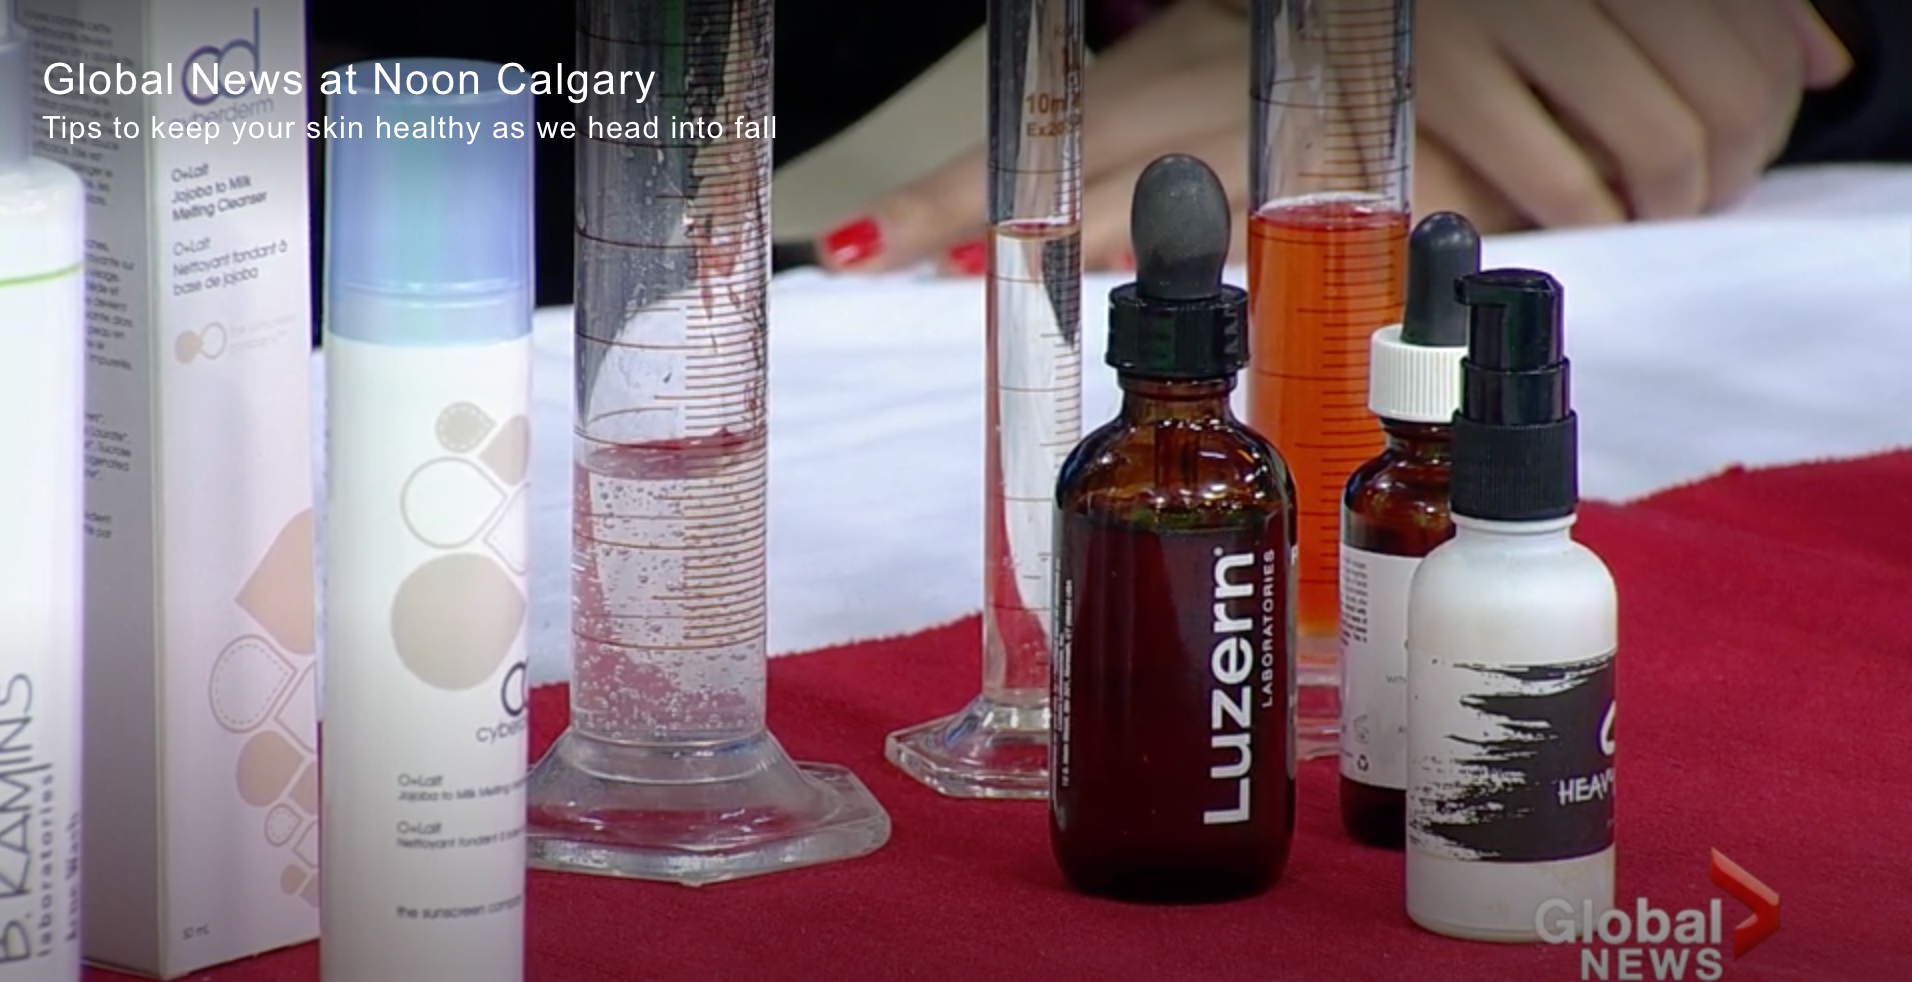 Tips to Keep Your Skin Healthy as We Head into Fall on Global News